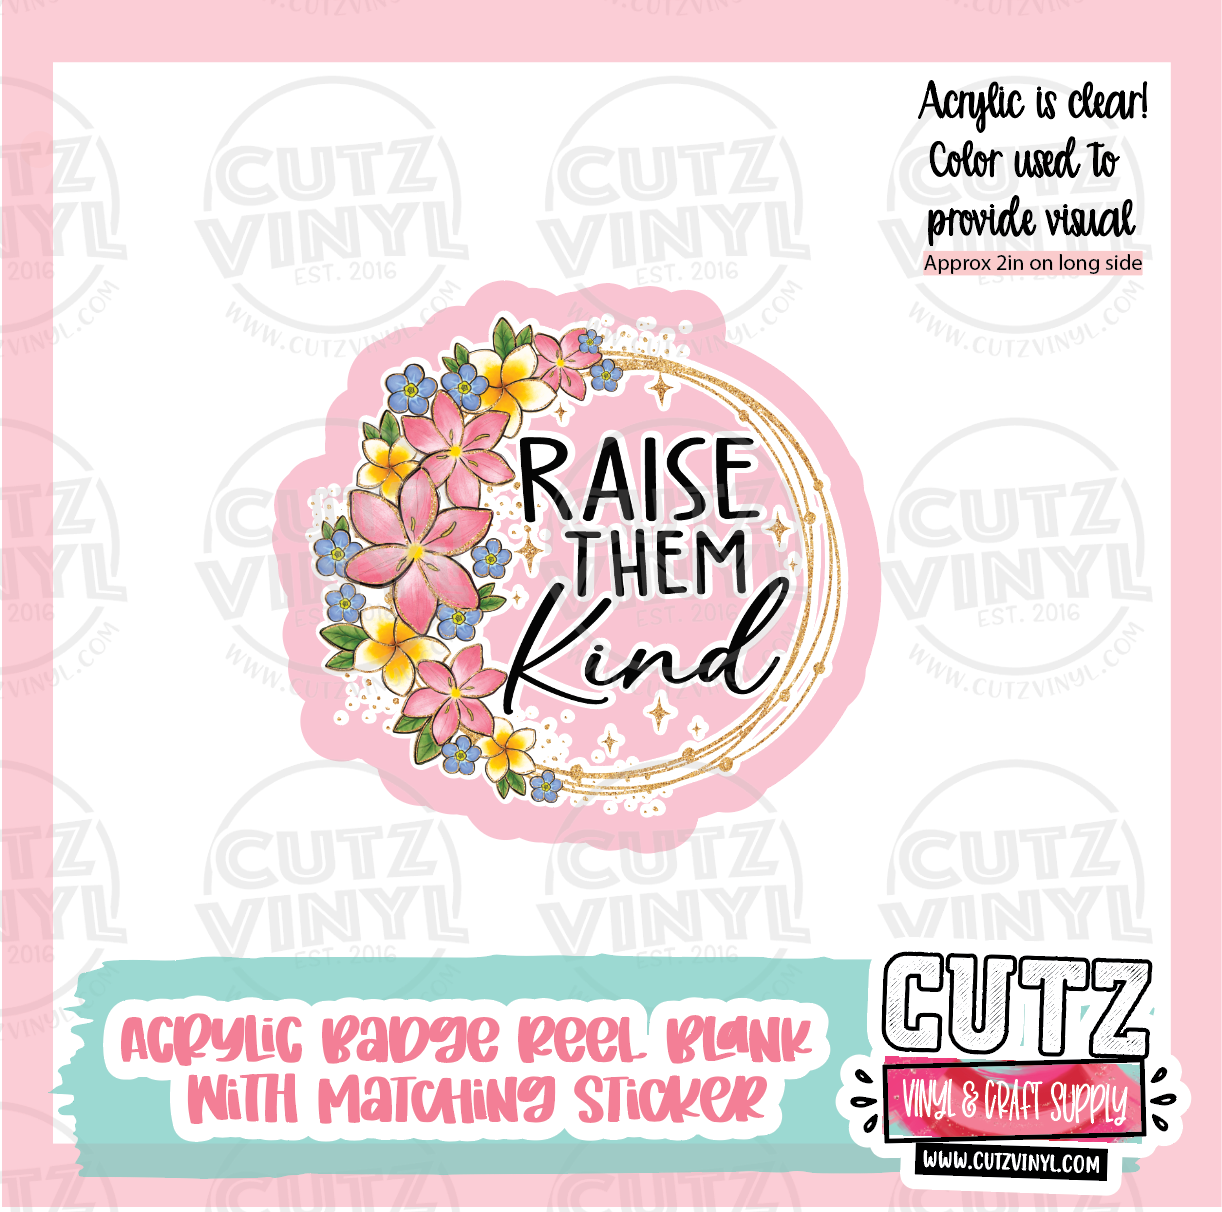 Raise Them Kind - Acrylic Badge Reel Blank and Matching Sticker